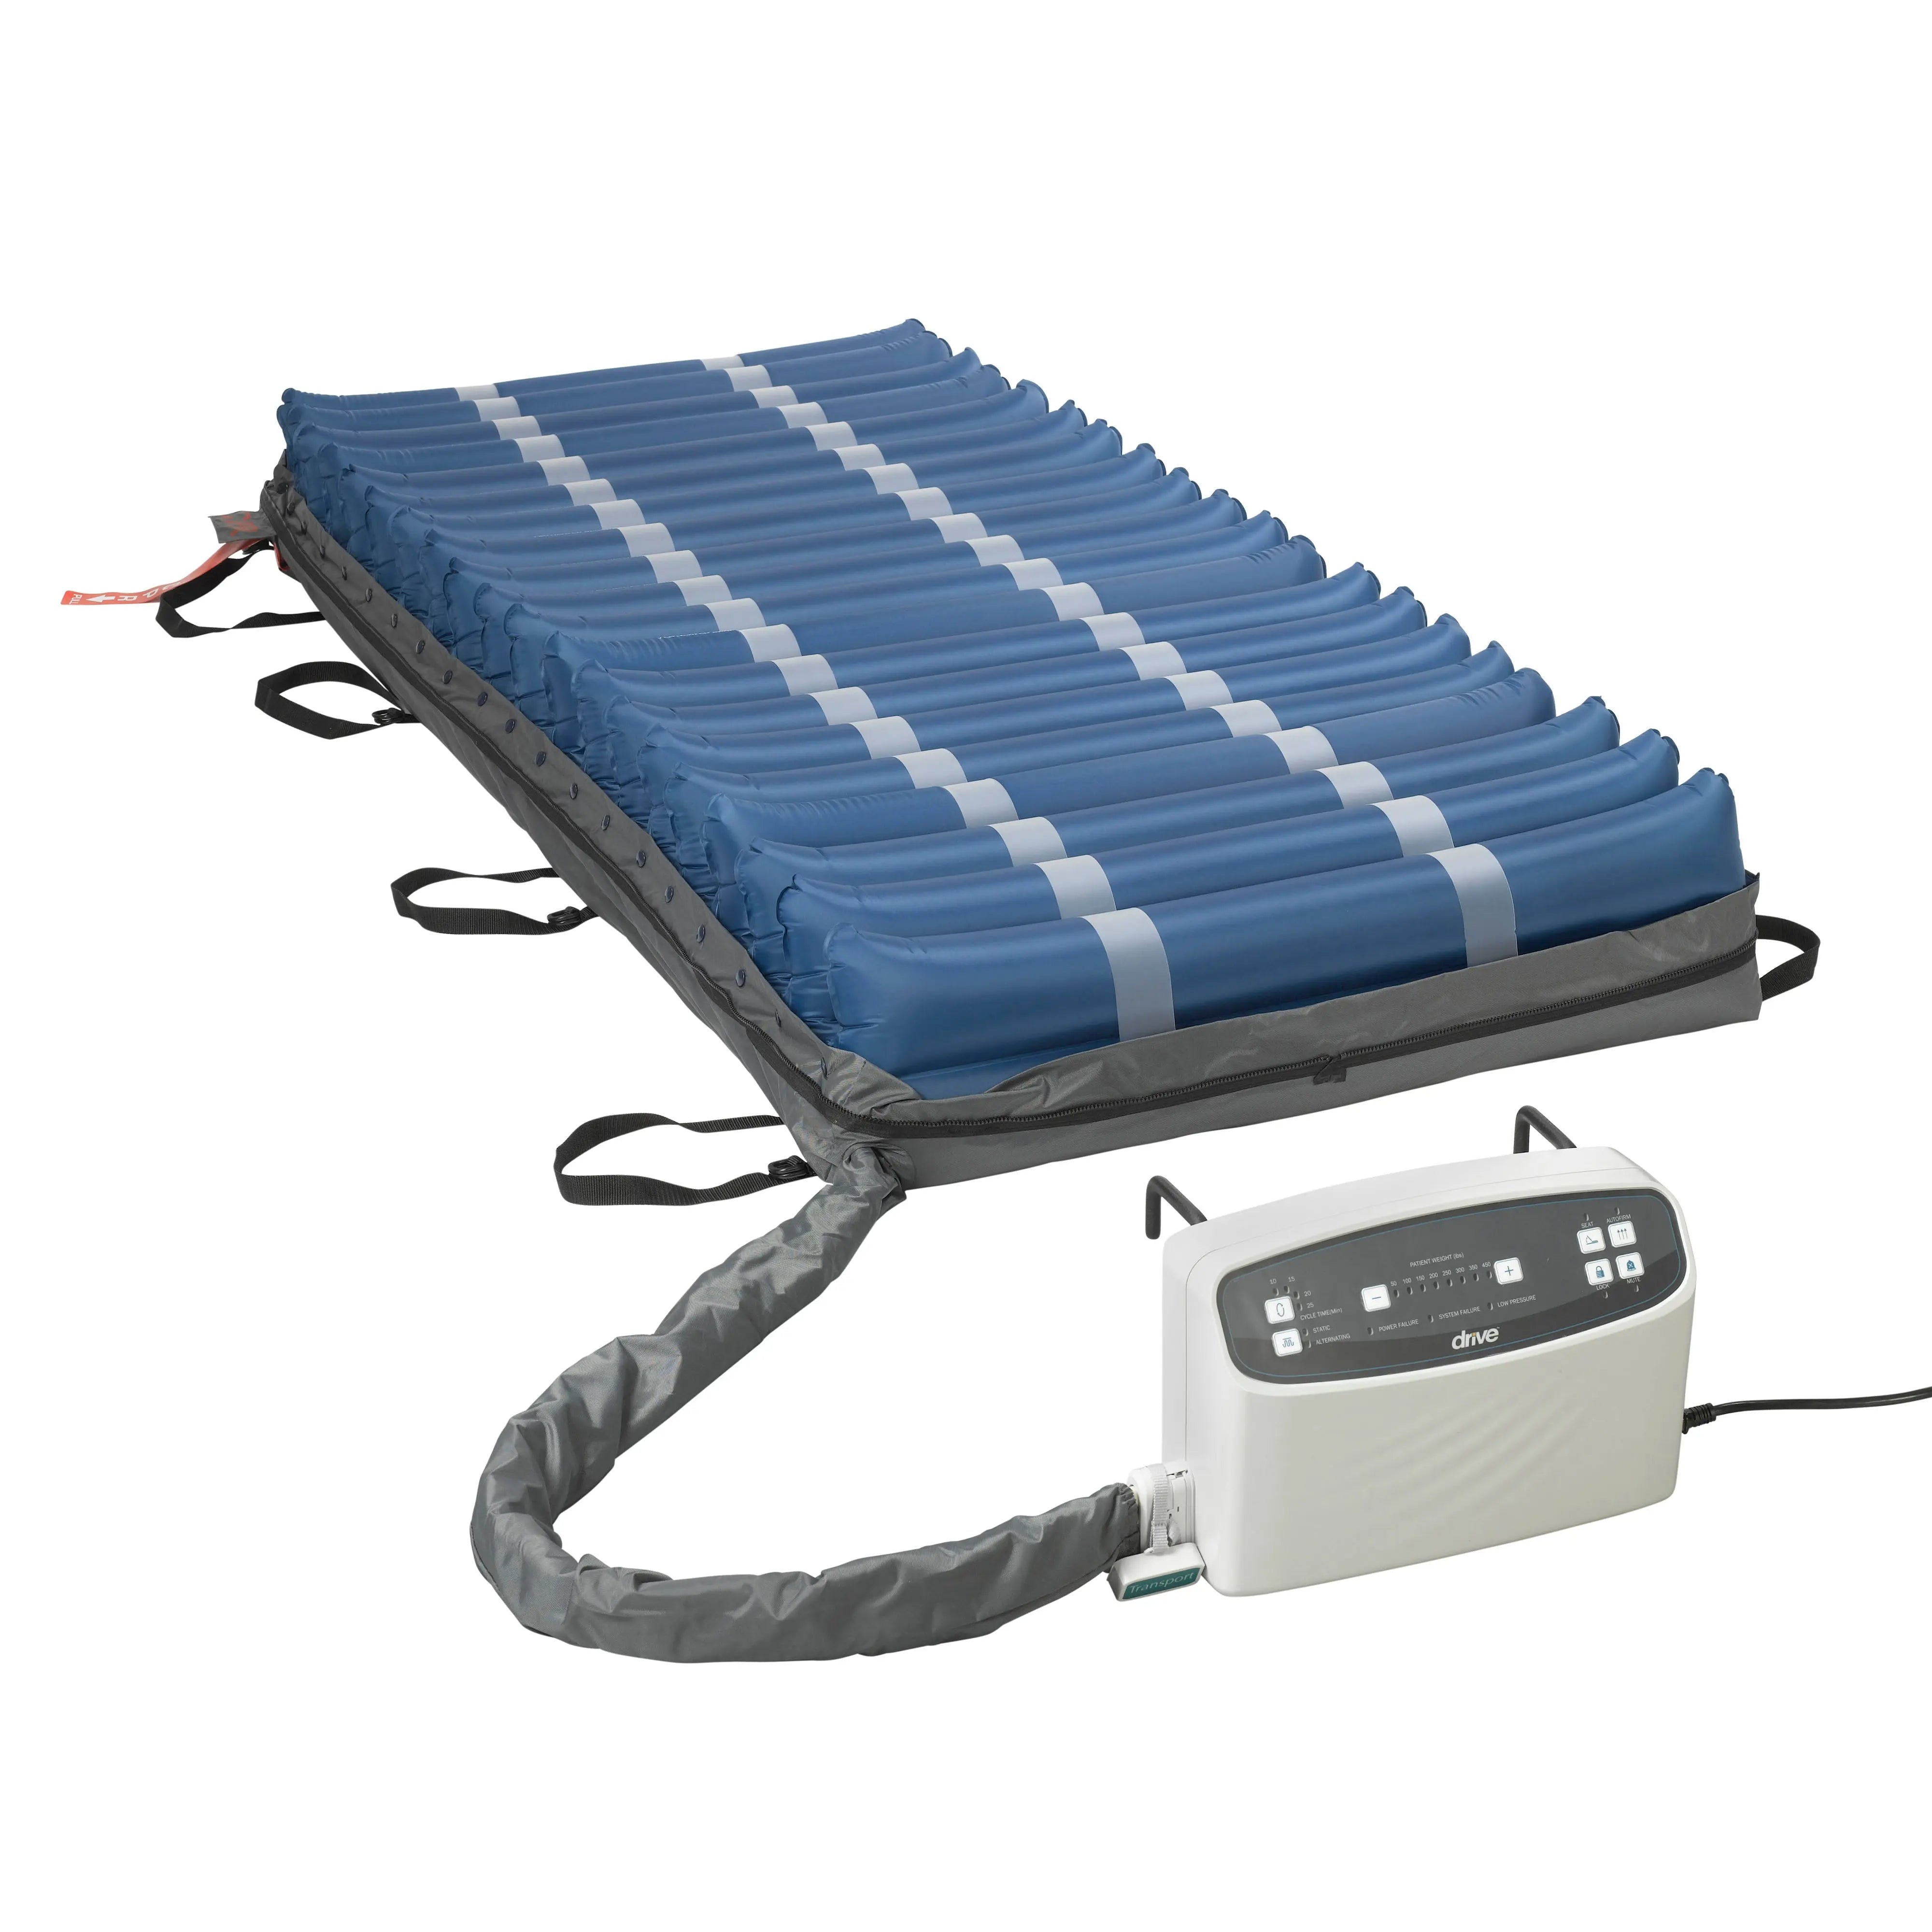 Med Aire Plus Low Air Loss Mattress Replacement System